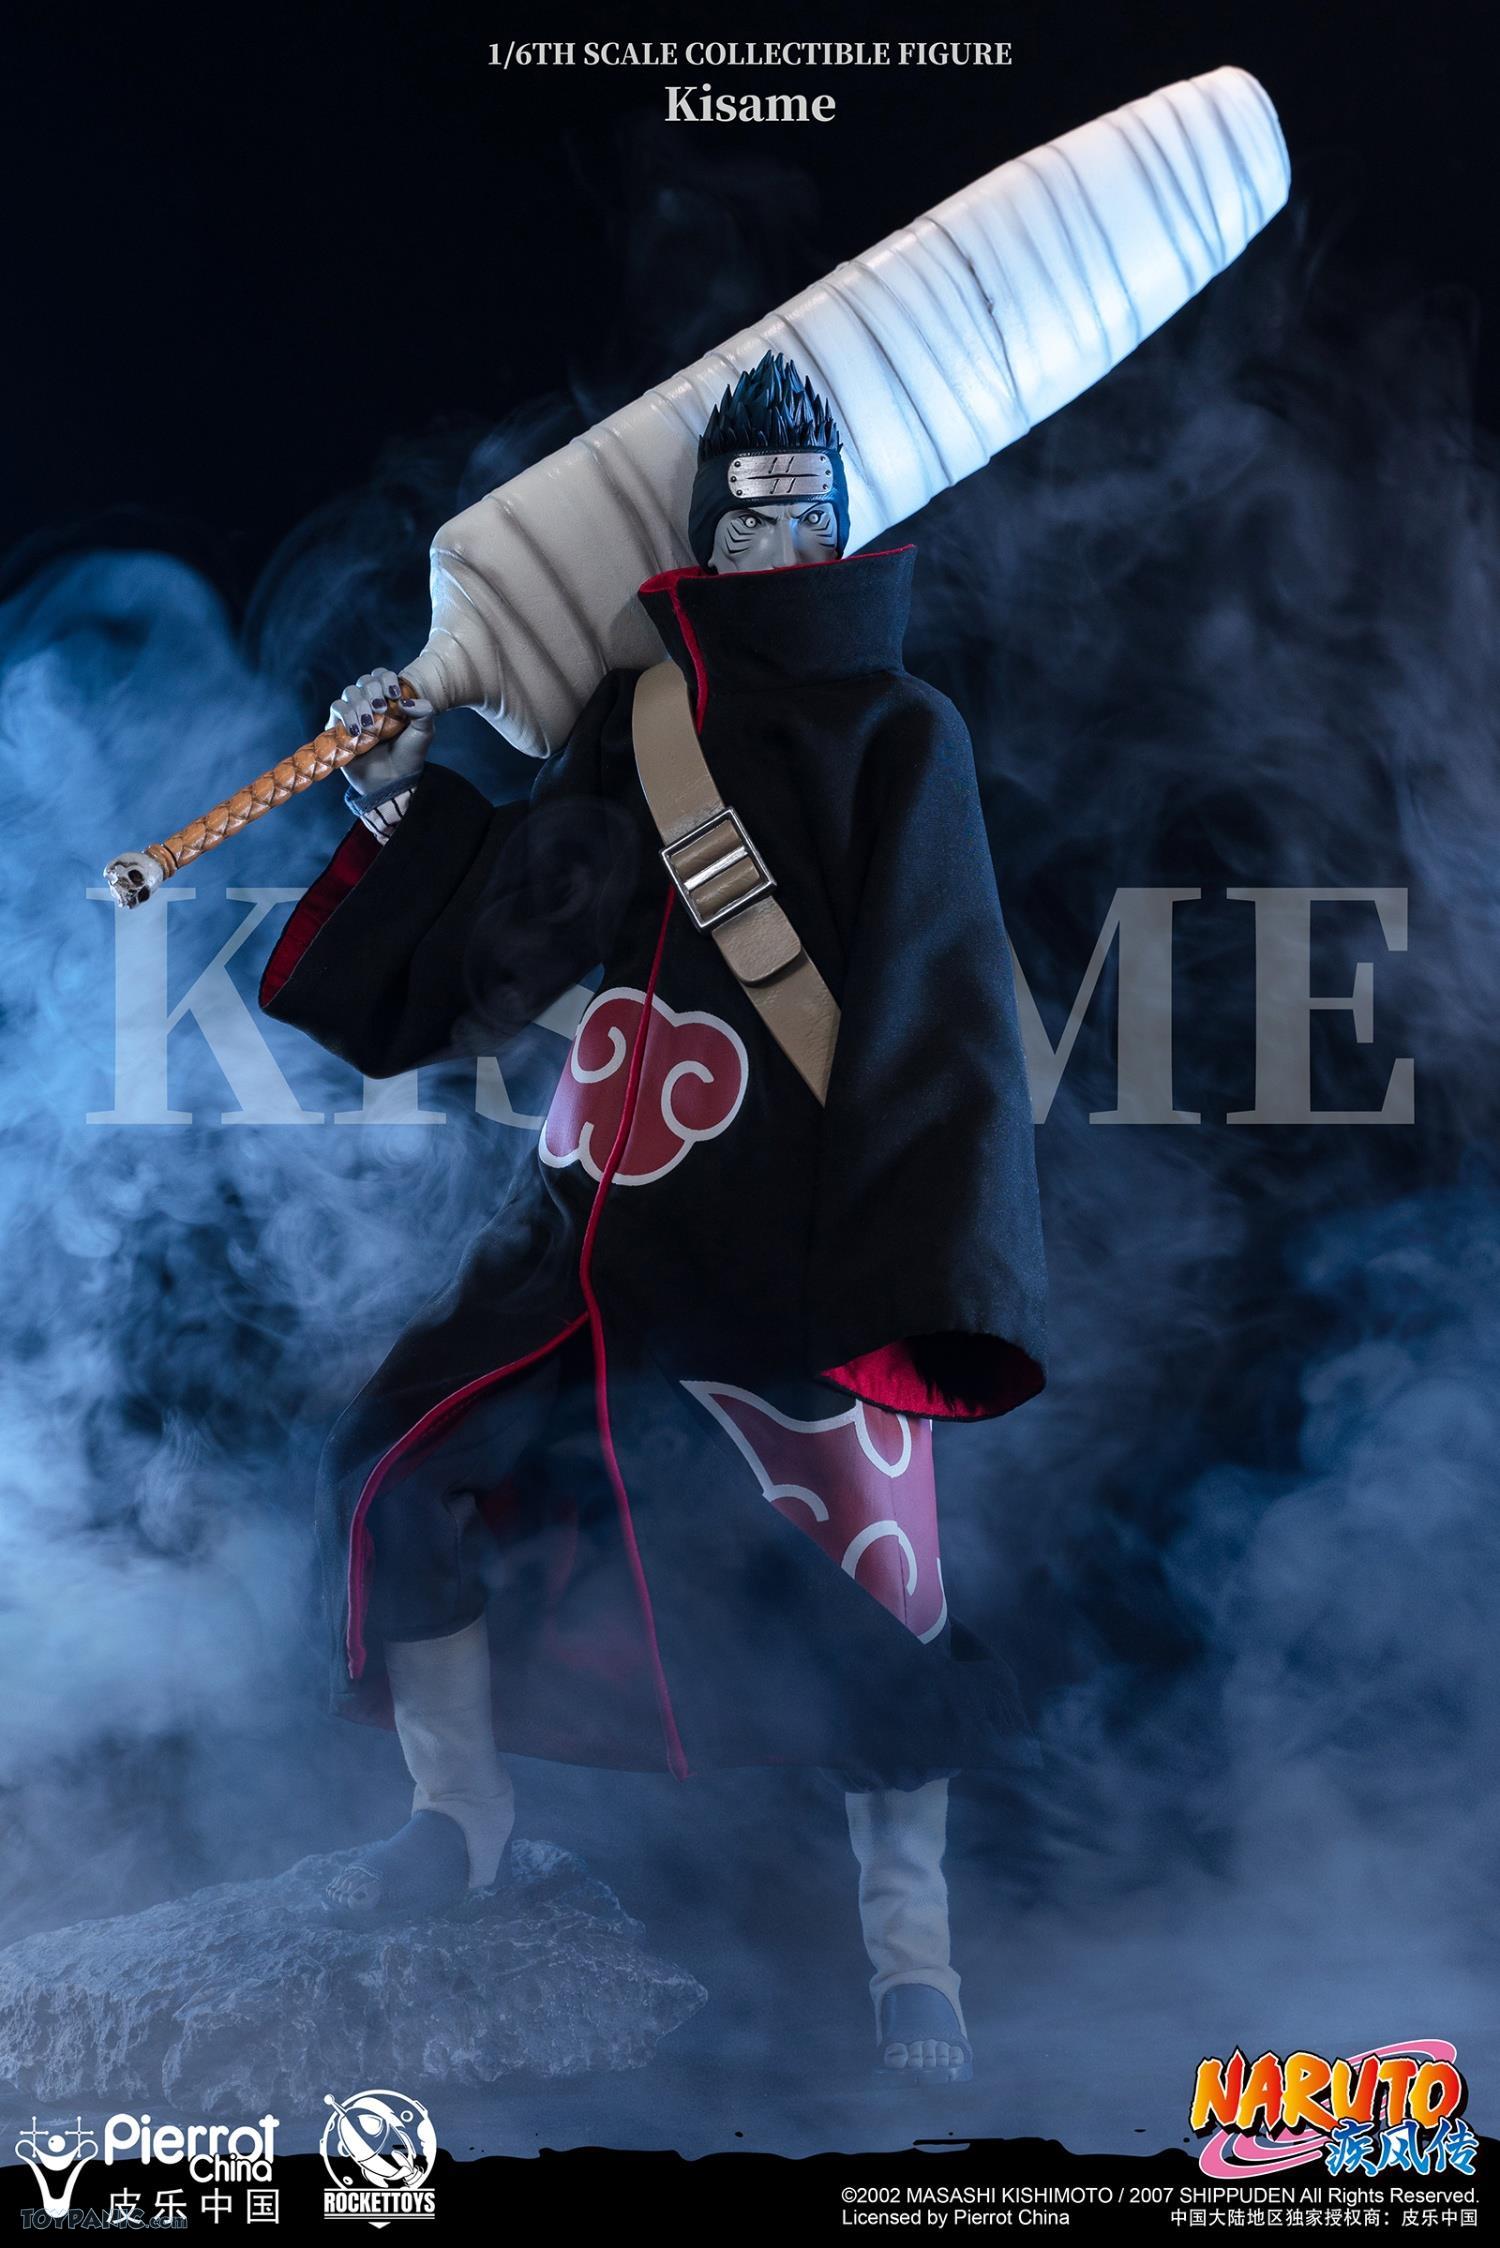 pierrot - NEW PRODUCT: Rocket Toys ROC-007 1/6 Scale Kisame 221202460433PM_5828364